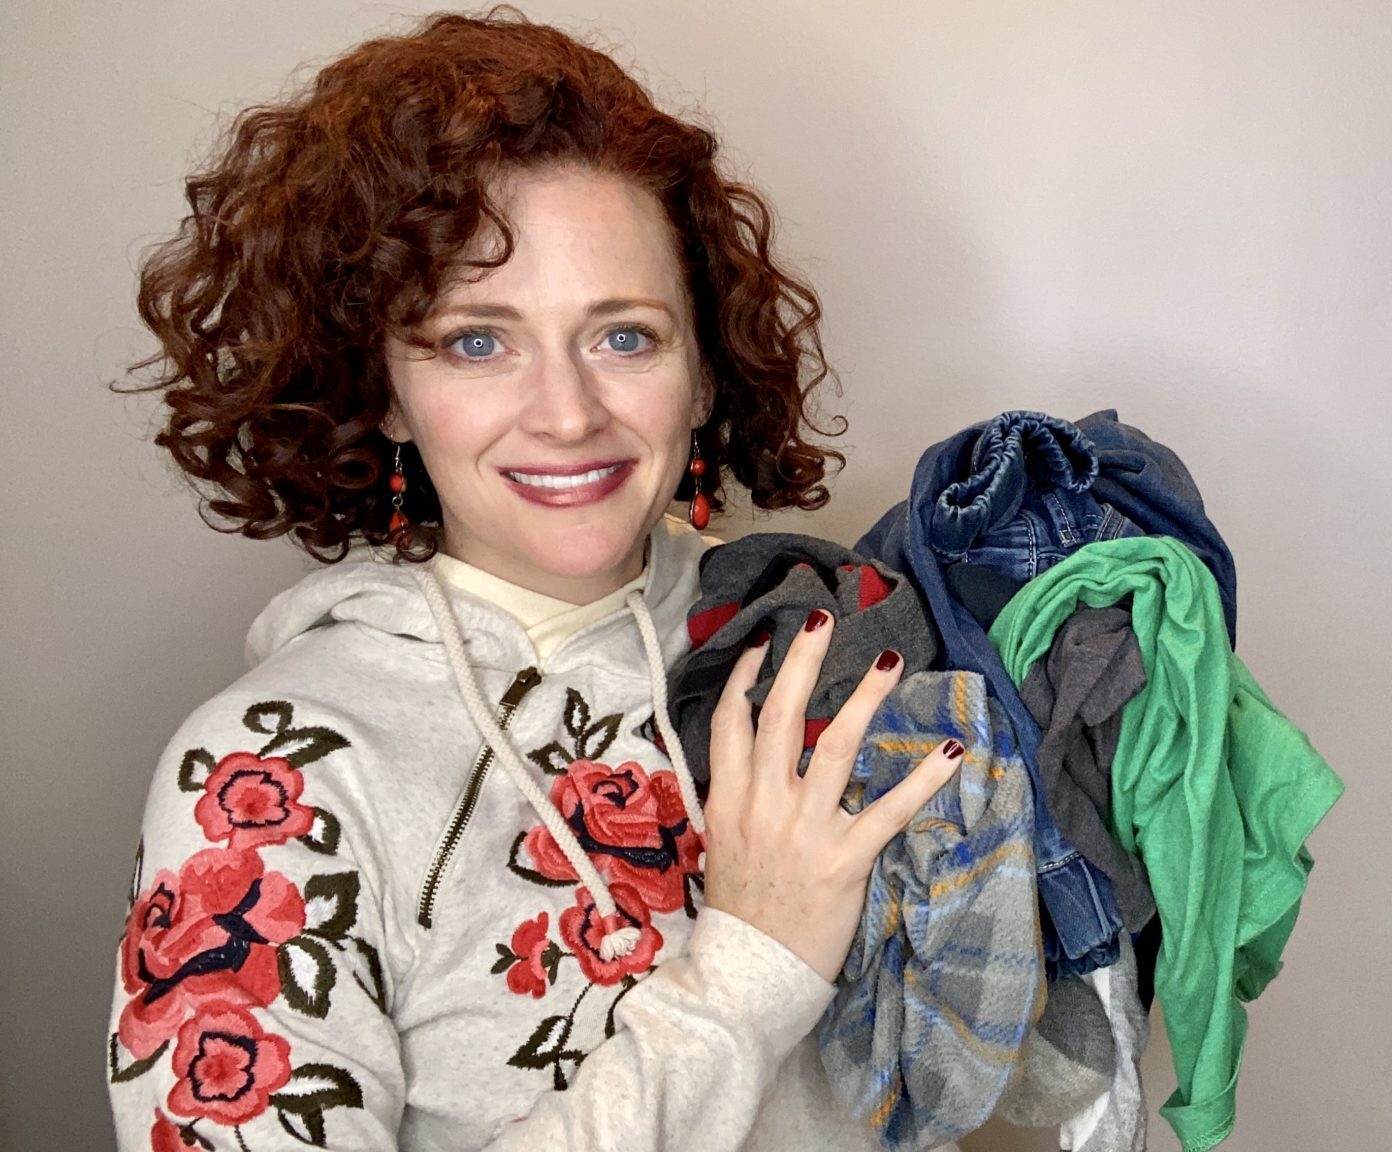 Laundry Hacks for Busy Moms and Families